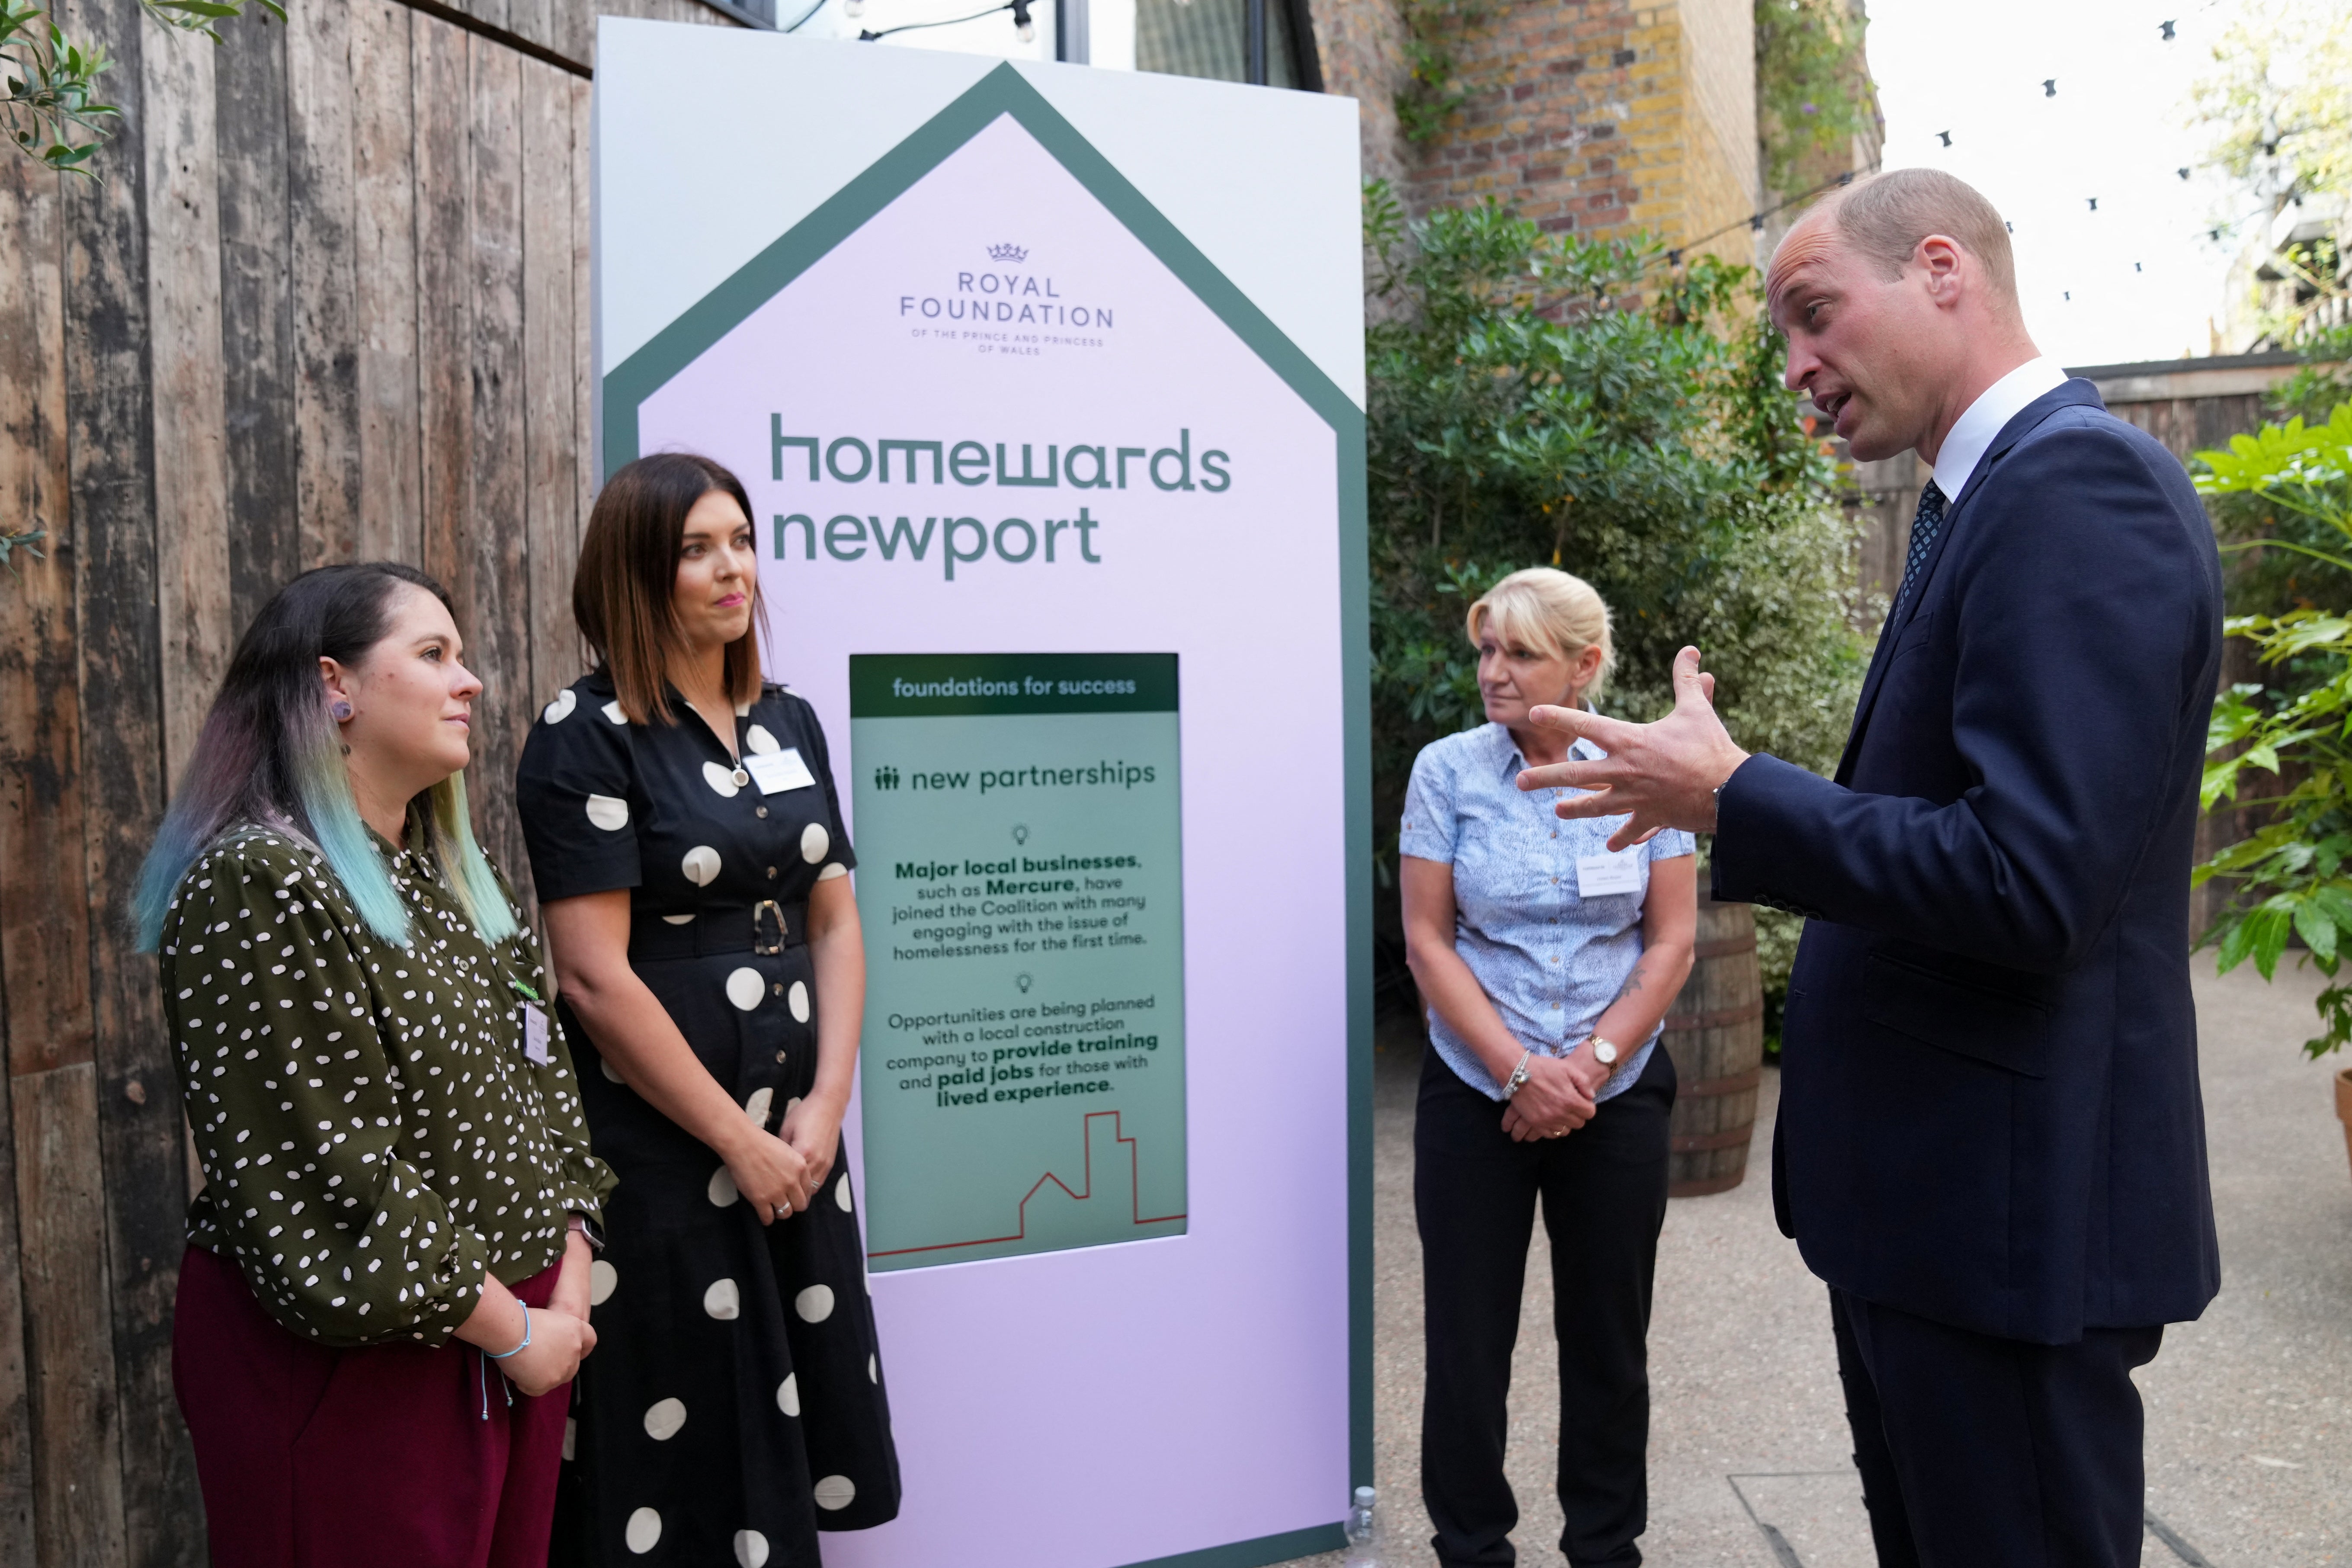 William believes Homewards ‘will have the power to inspire change across the UK and beyond’